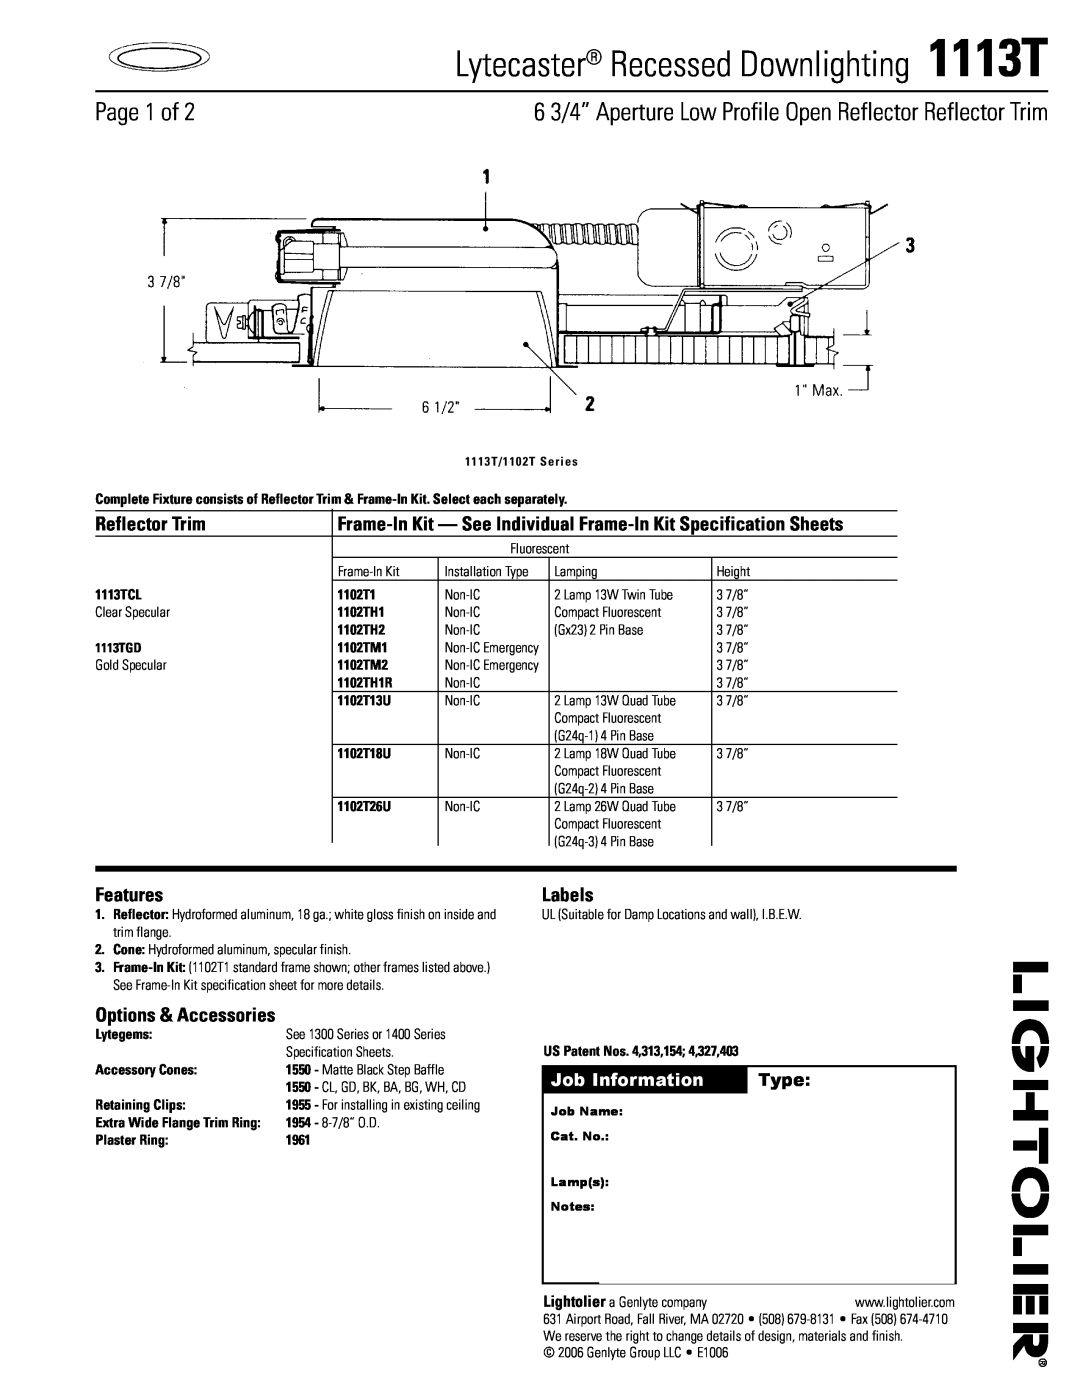 Lightolier specifications Page  of, Job Information, Type, Lytecaster Recessed Downlighting 1113T, Reflector Trim 